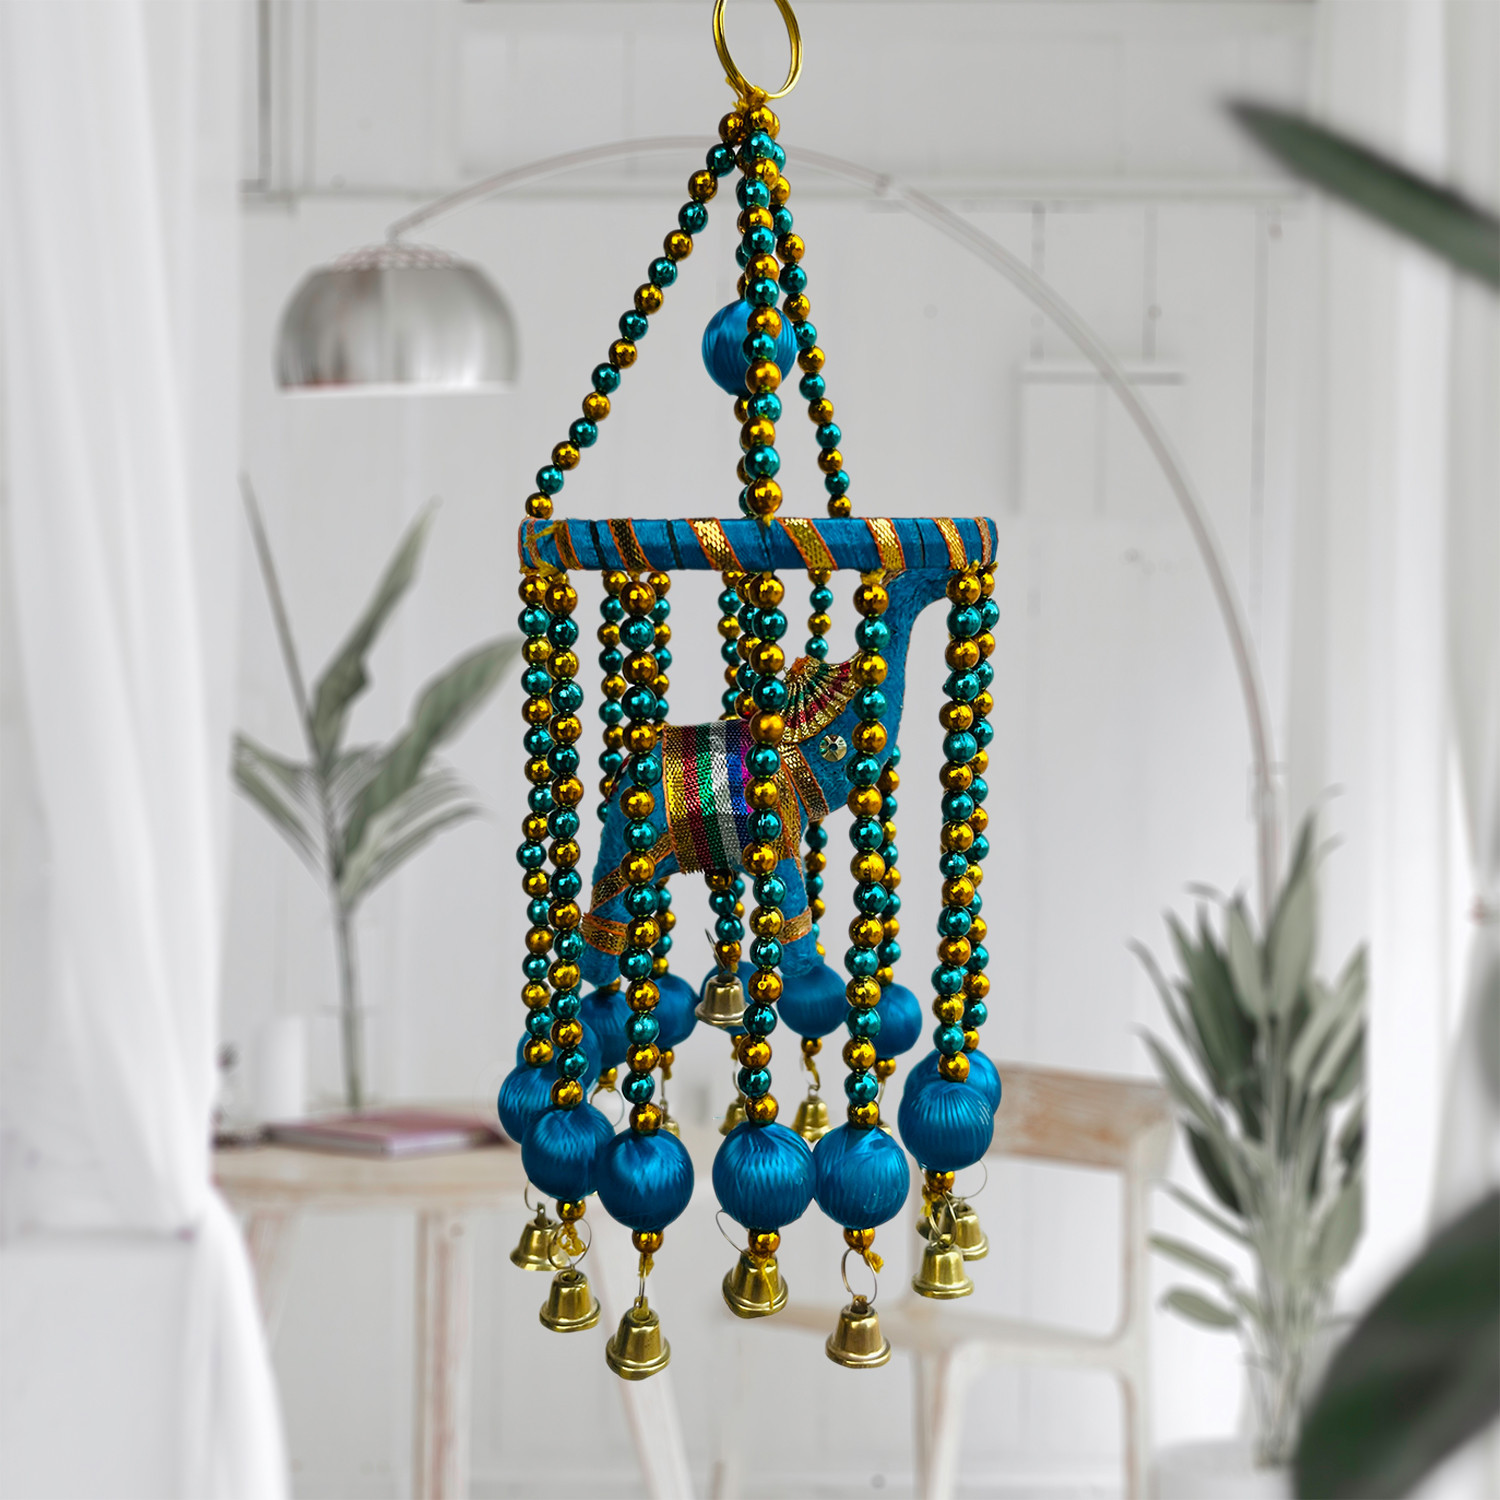 Kuber Industries Rajasthani Traditional Windchimes|1 Ring Elephant Jhumar with Bells|Polyester Handcrafted Latkan|Decorative Door Hanging Latkan (Multicolor)